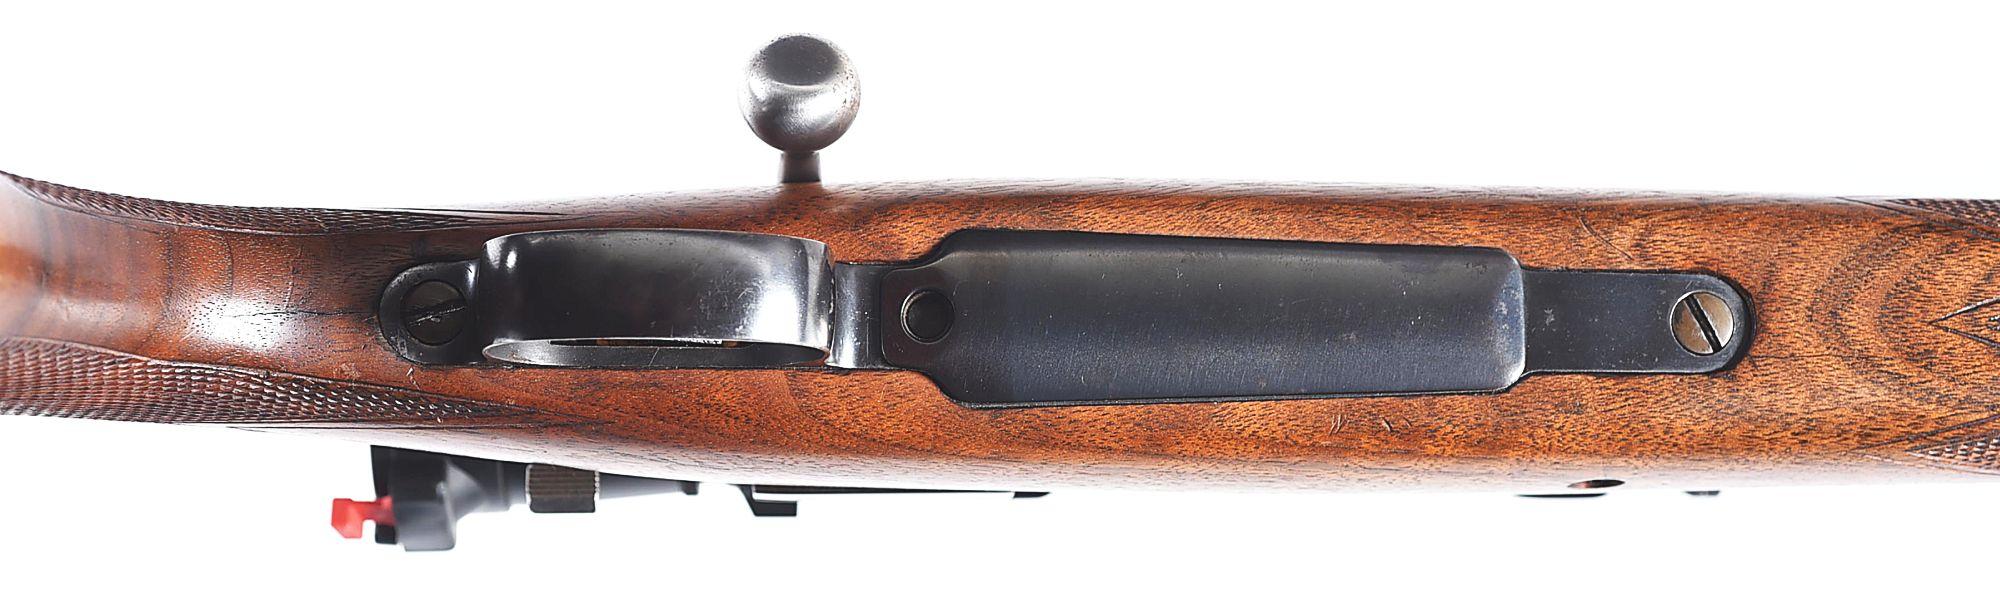 (M) CUSTOM MAUSER ACTION SAFARI RIFLE CHAMBERED IN .458 EXPRESS